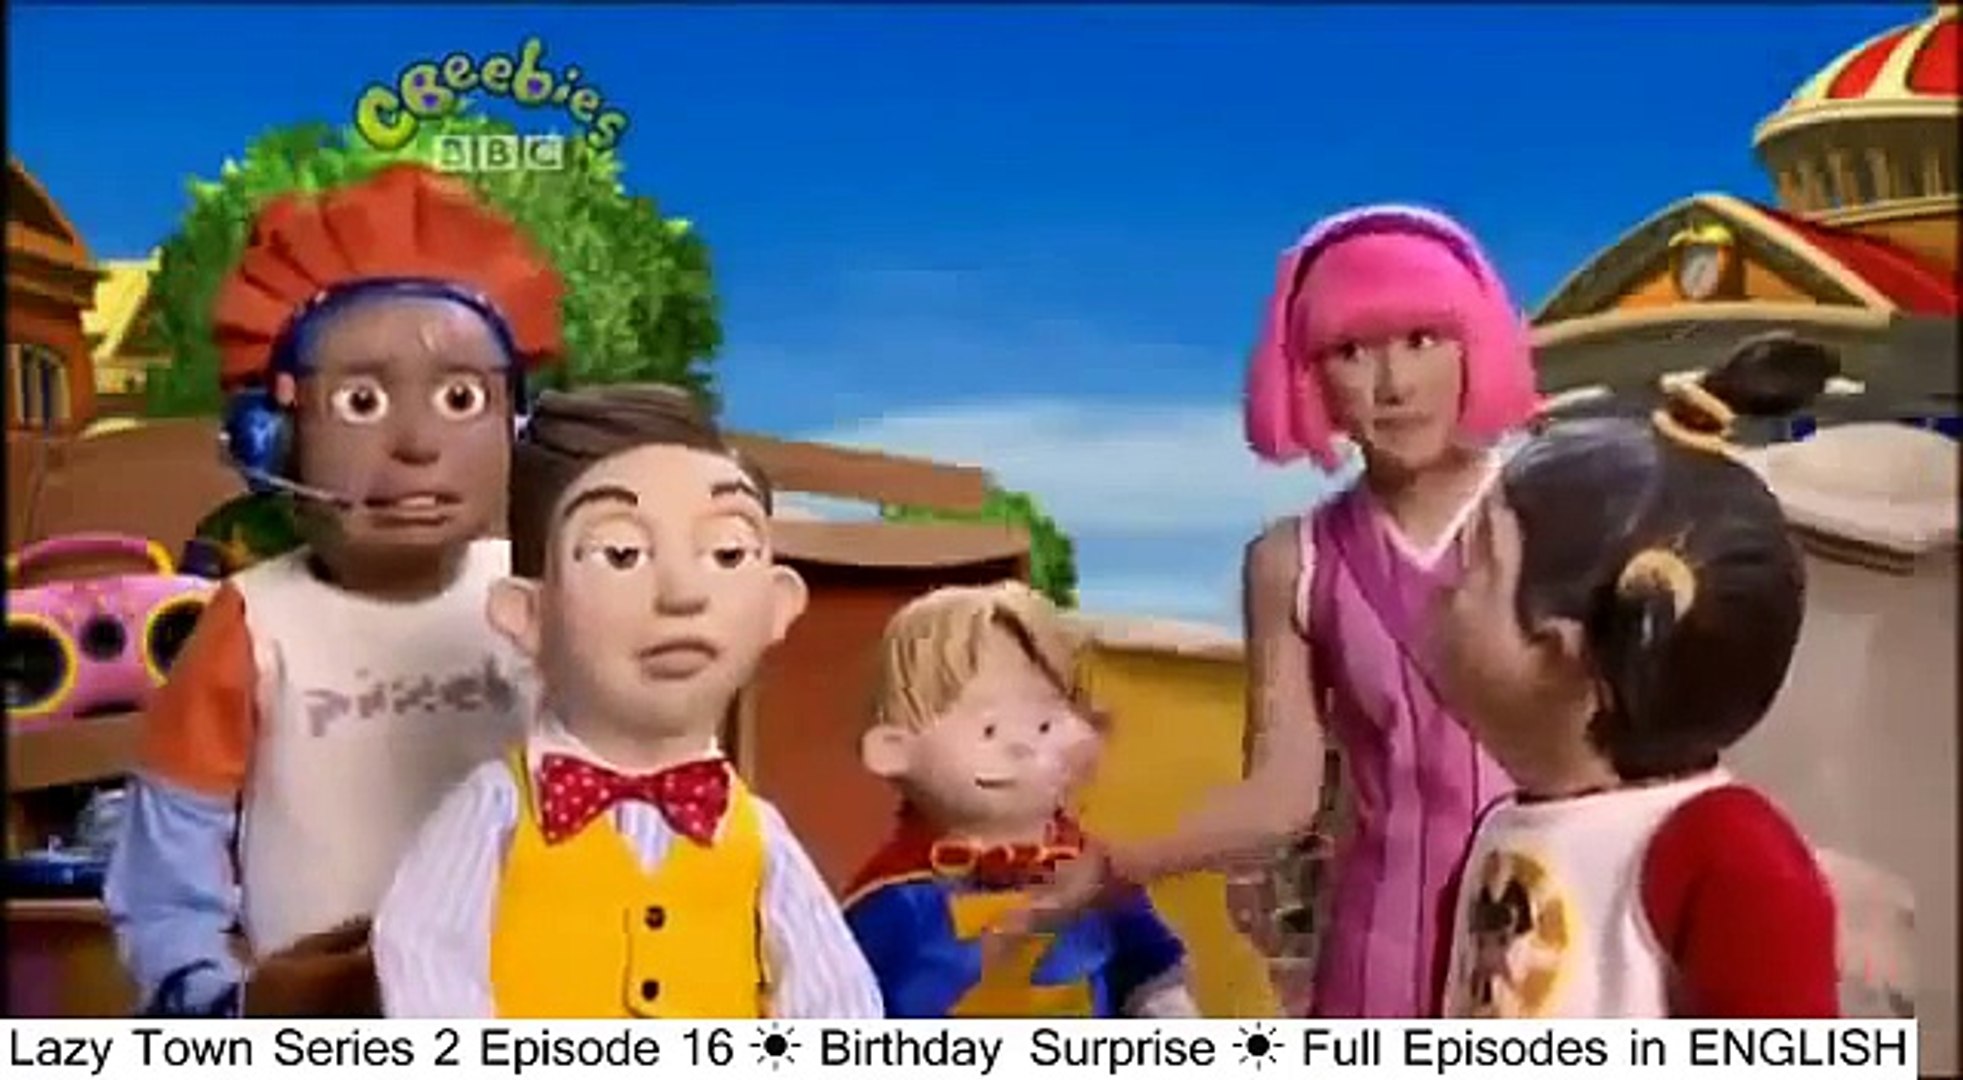 What was the last episode of LazyTown?